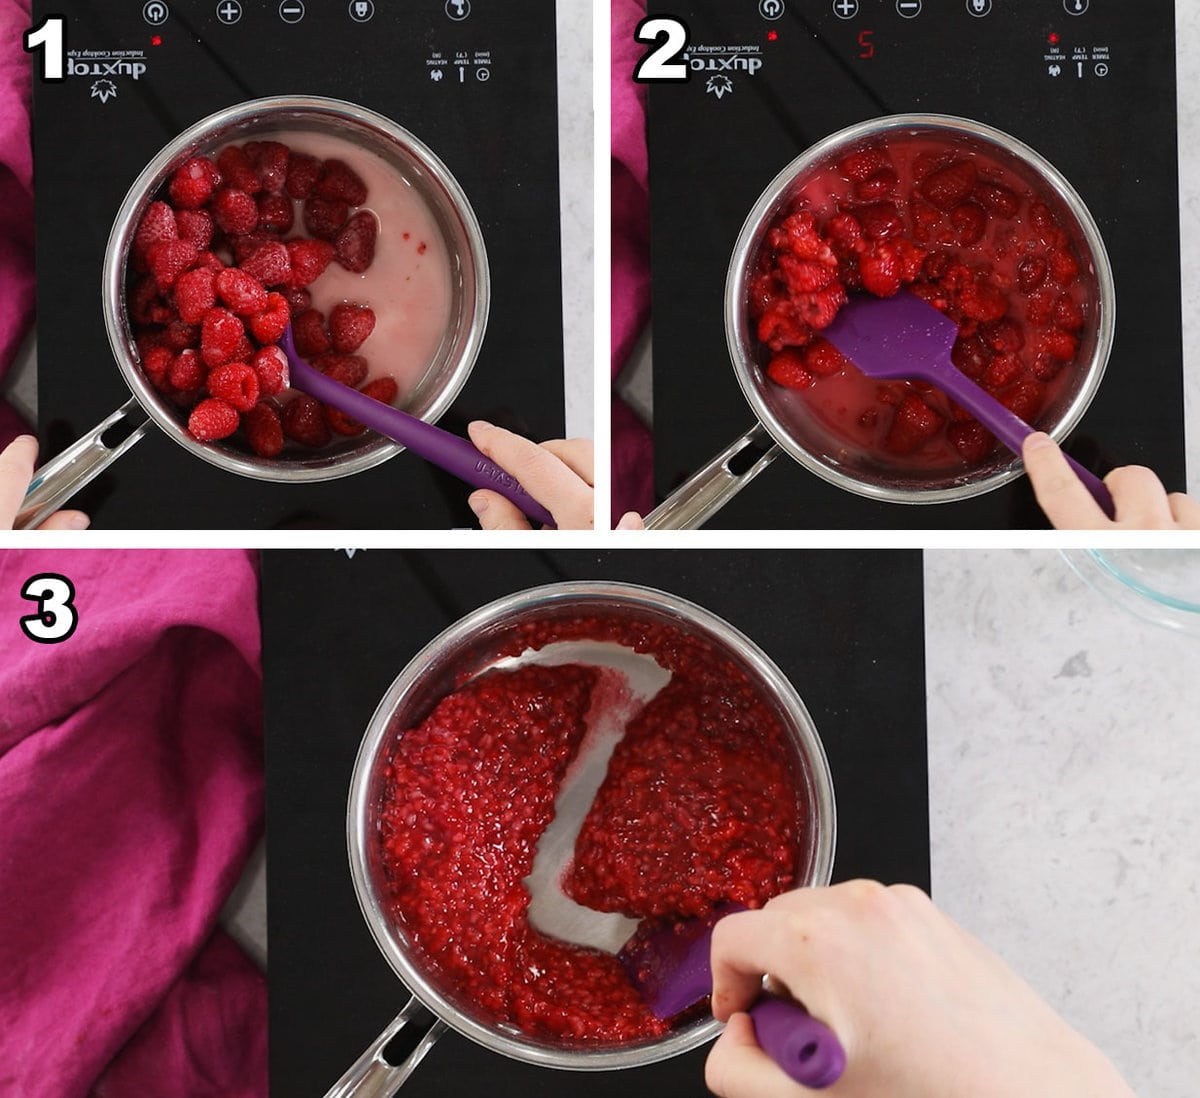 Three photos showing raspberry cake filling being prepared.